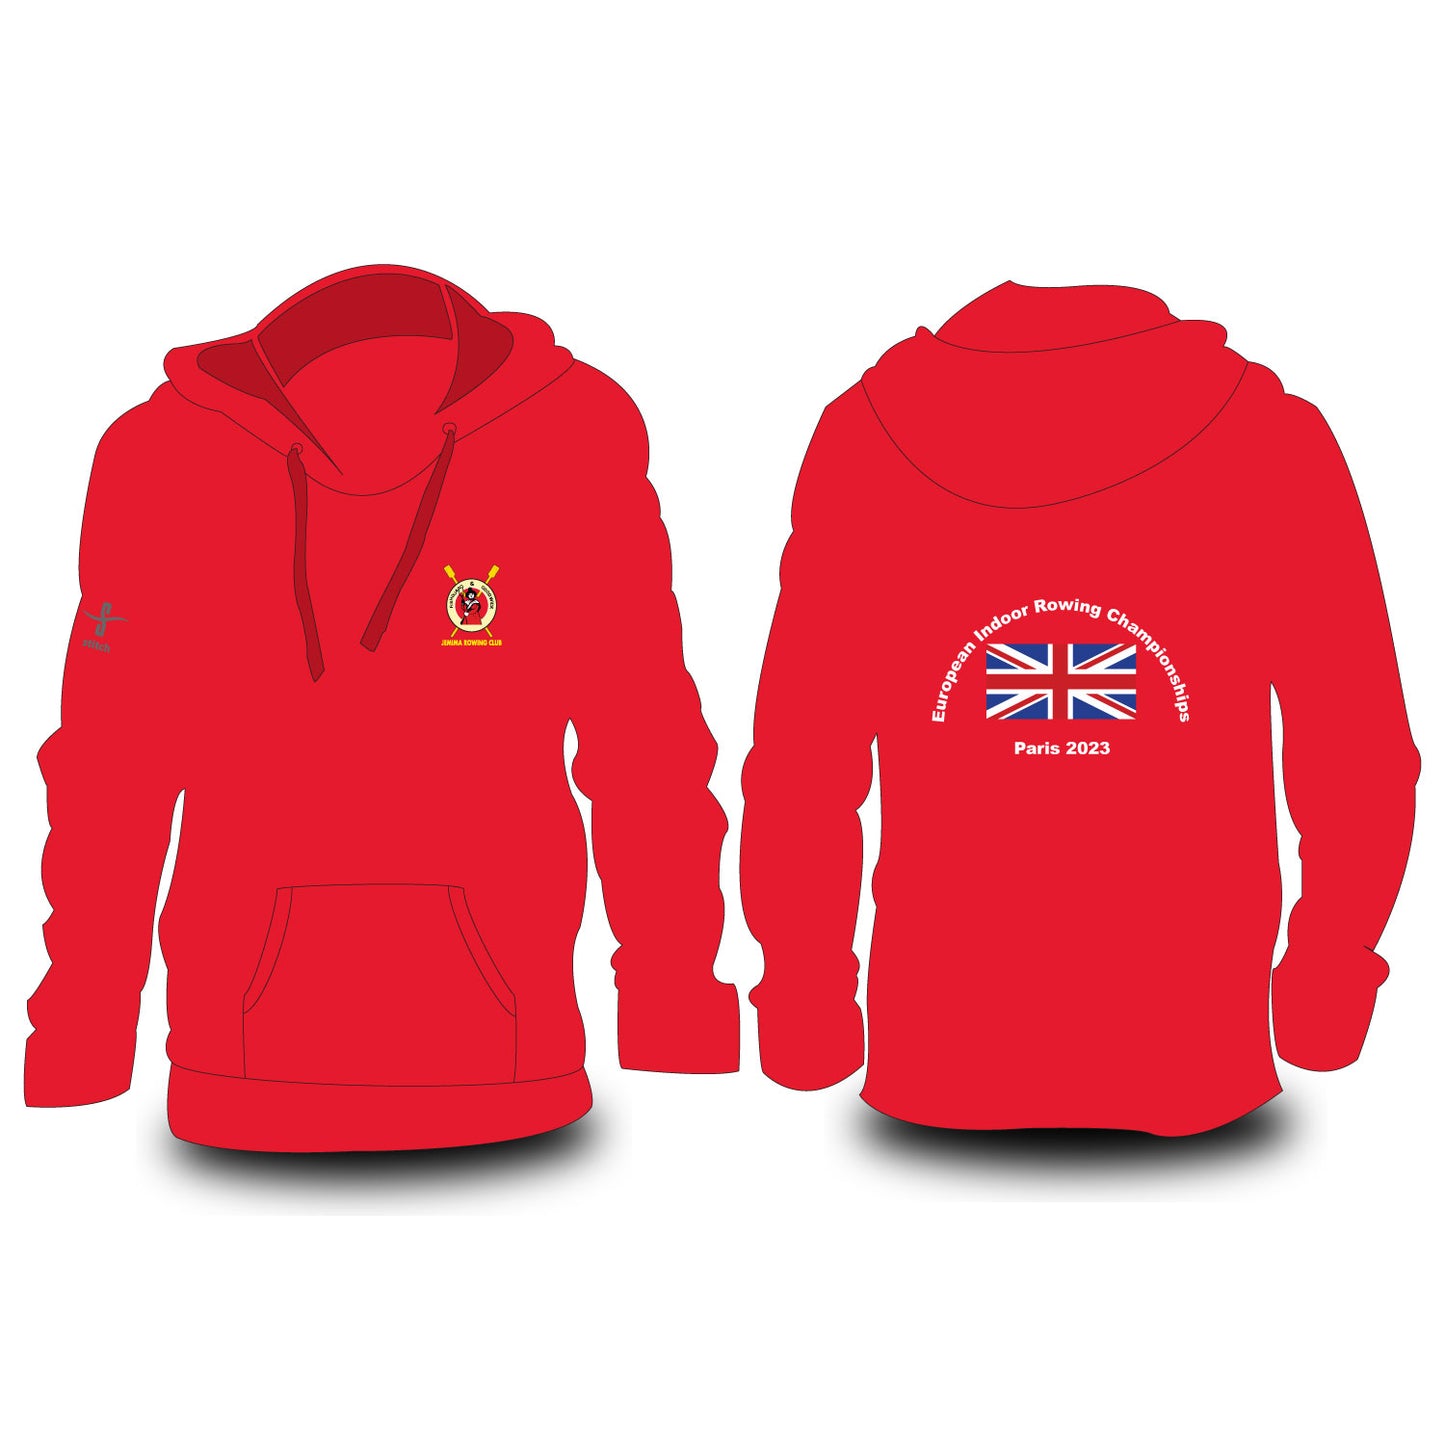 Fishguard and Goodwick European Indoor Rowing Championships Paris 2023 Hoodie